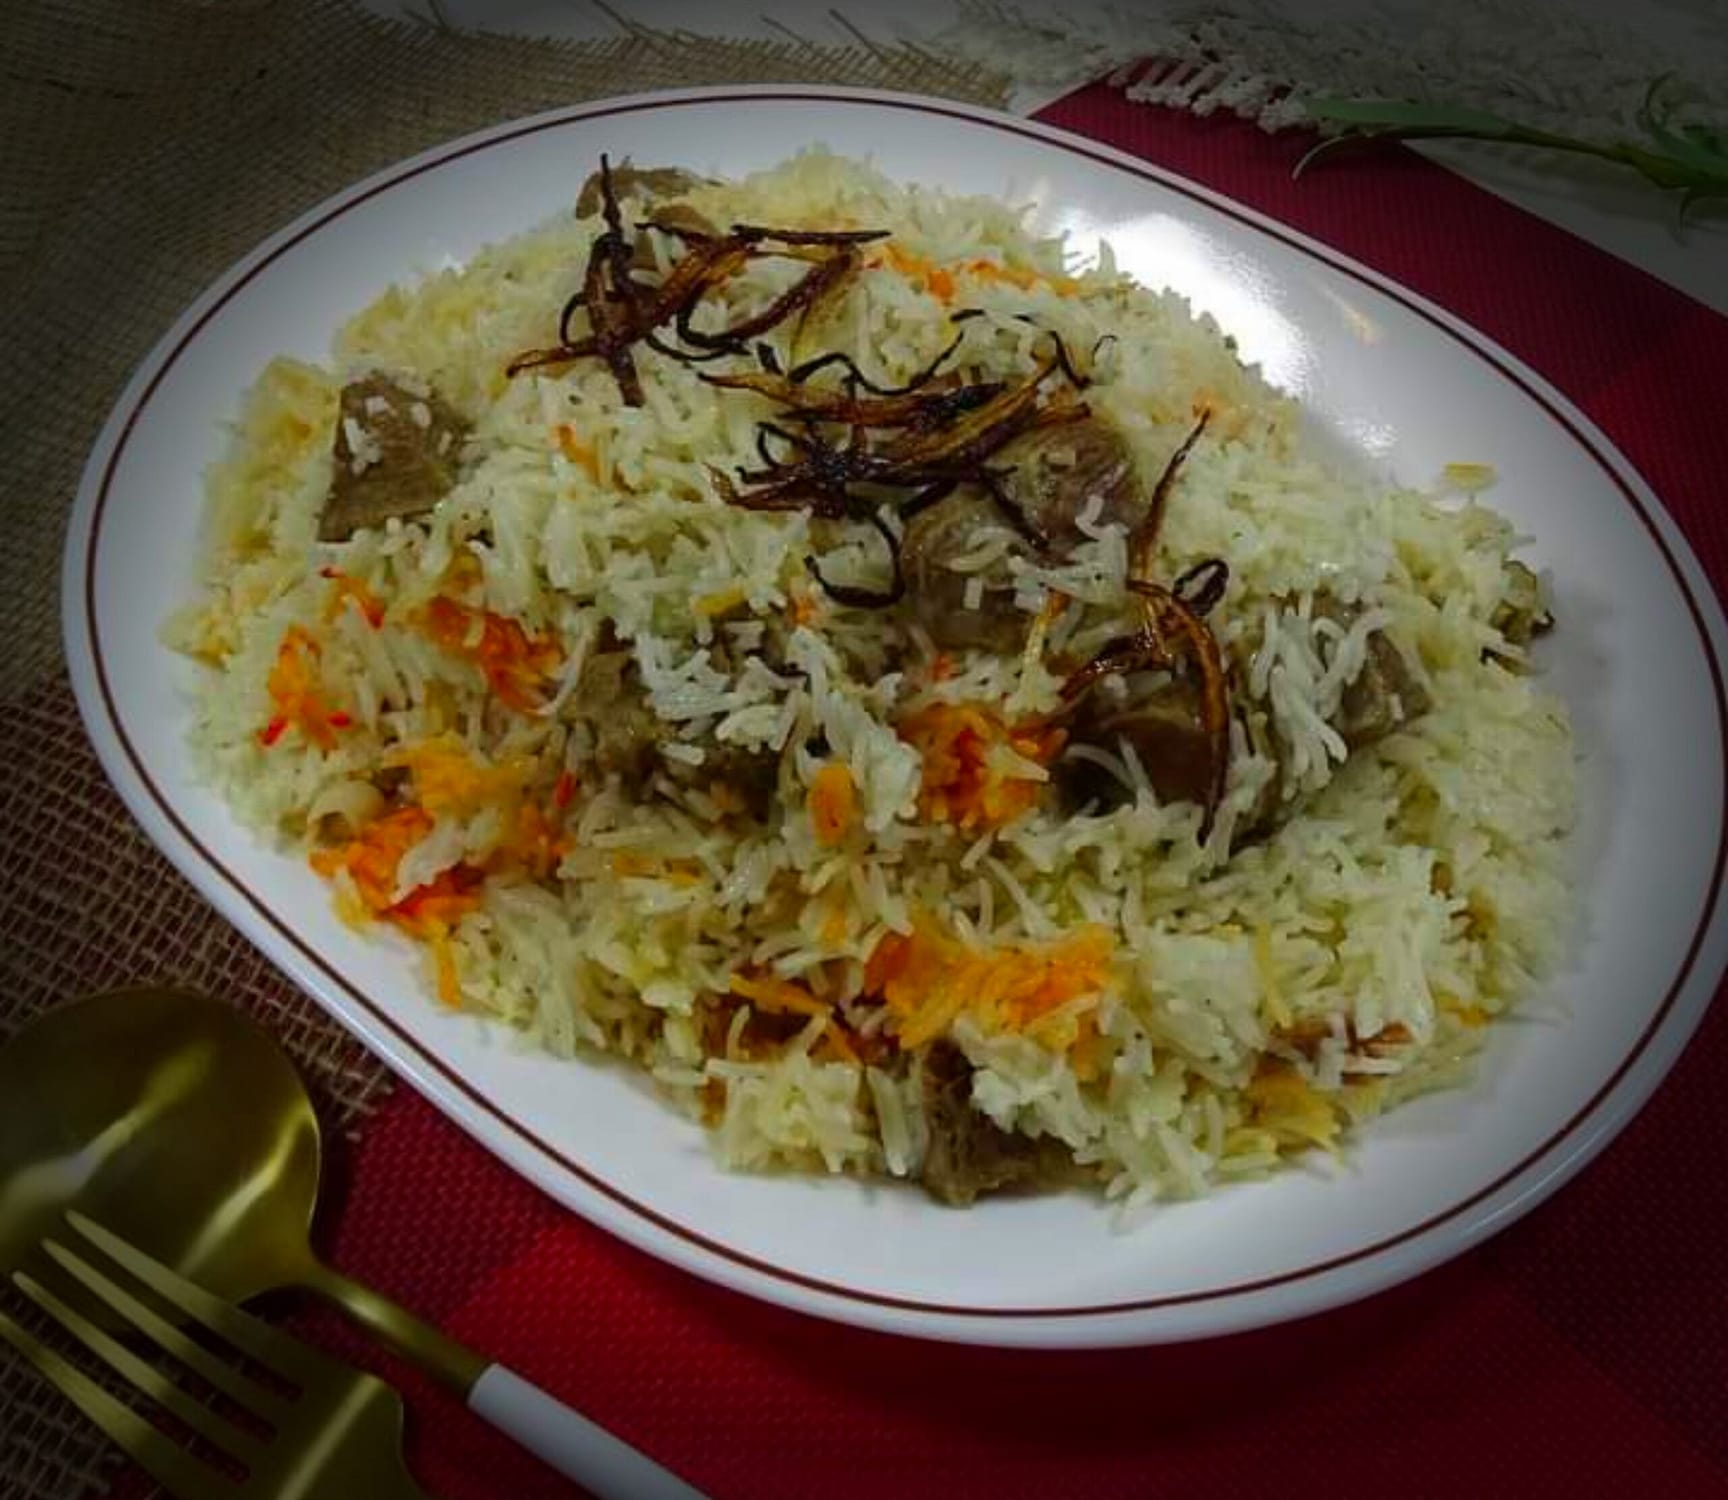 How To Cook Mutton Stock Pulao or Mutton Yakhni Pulao?